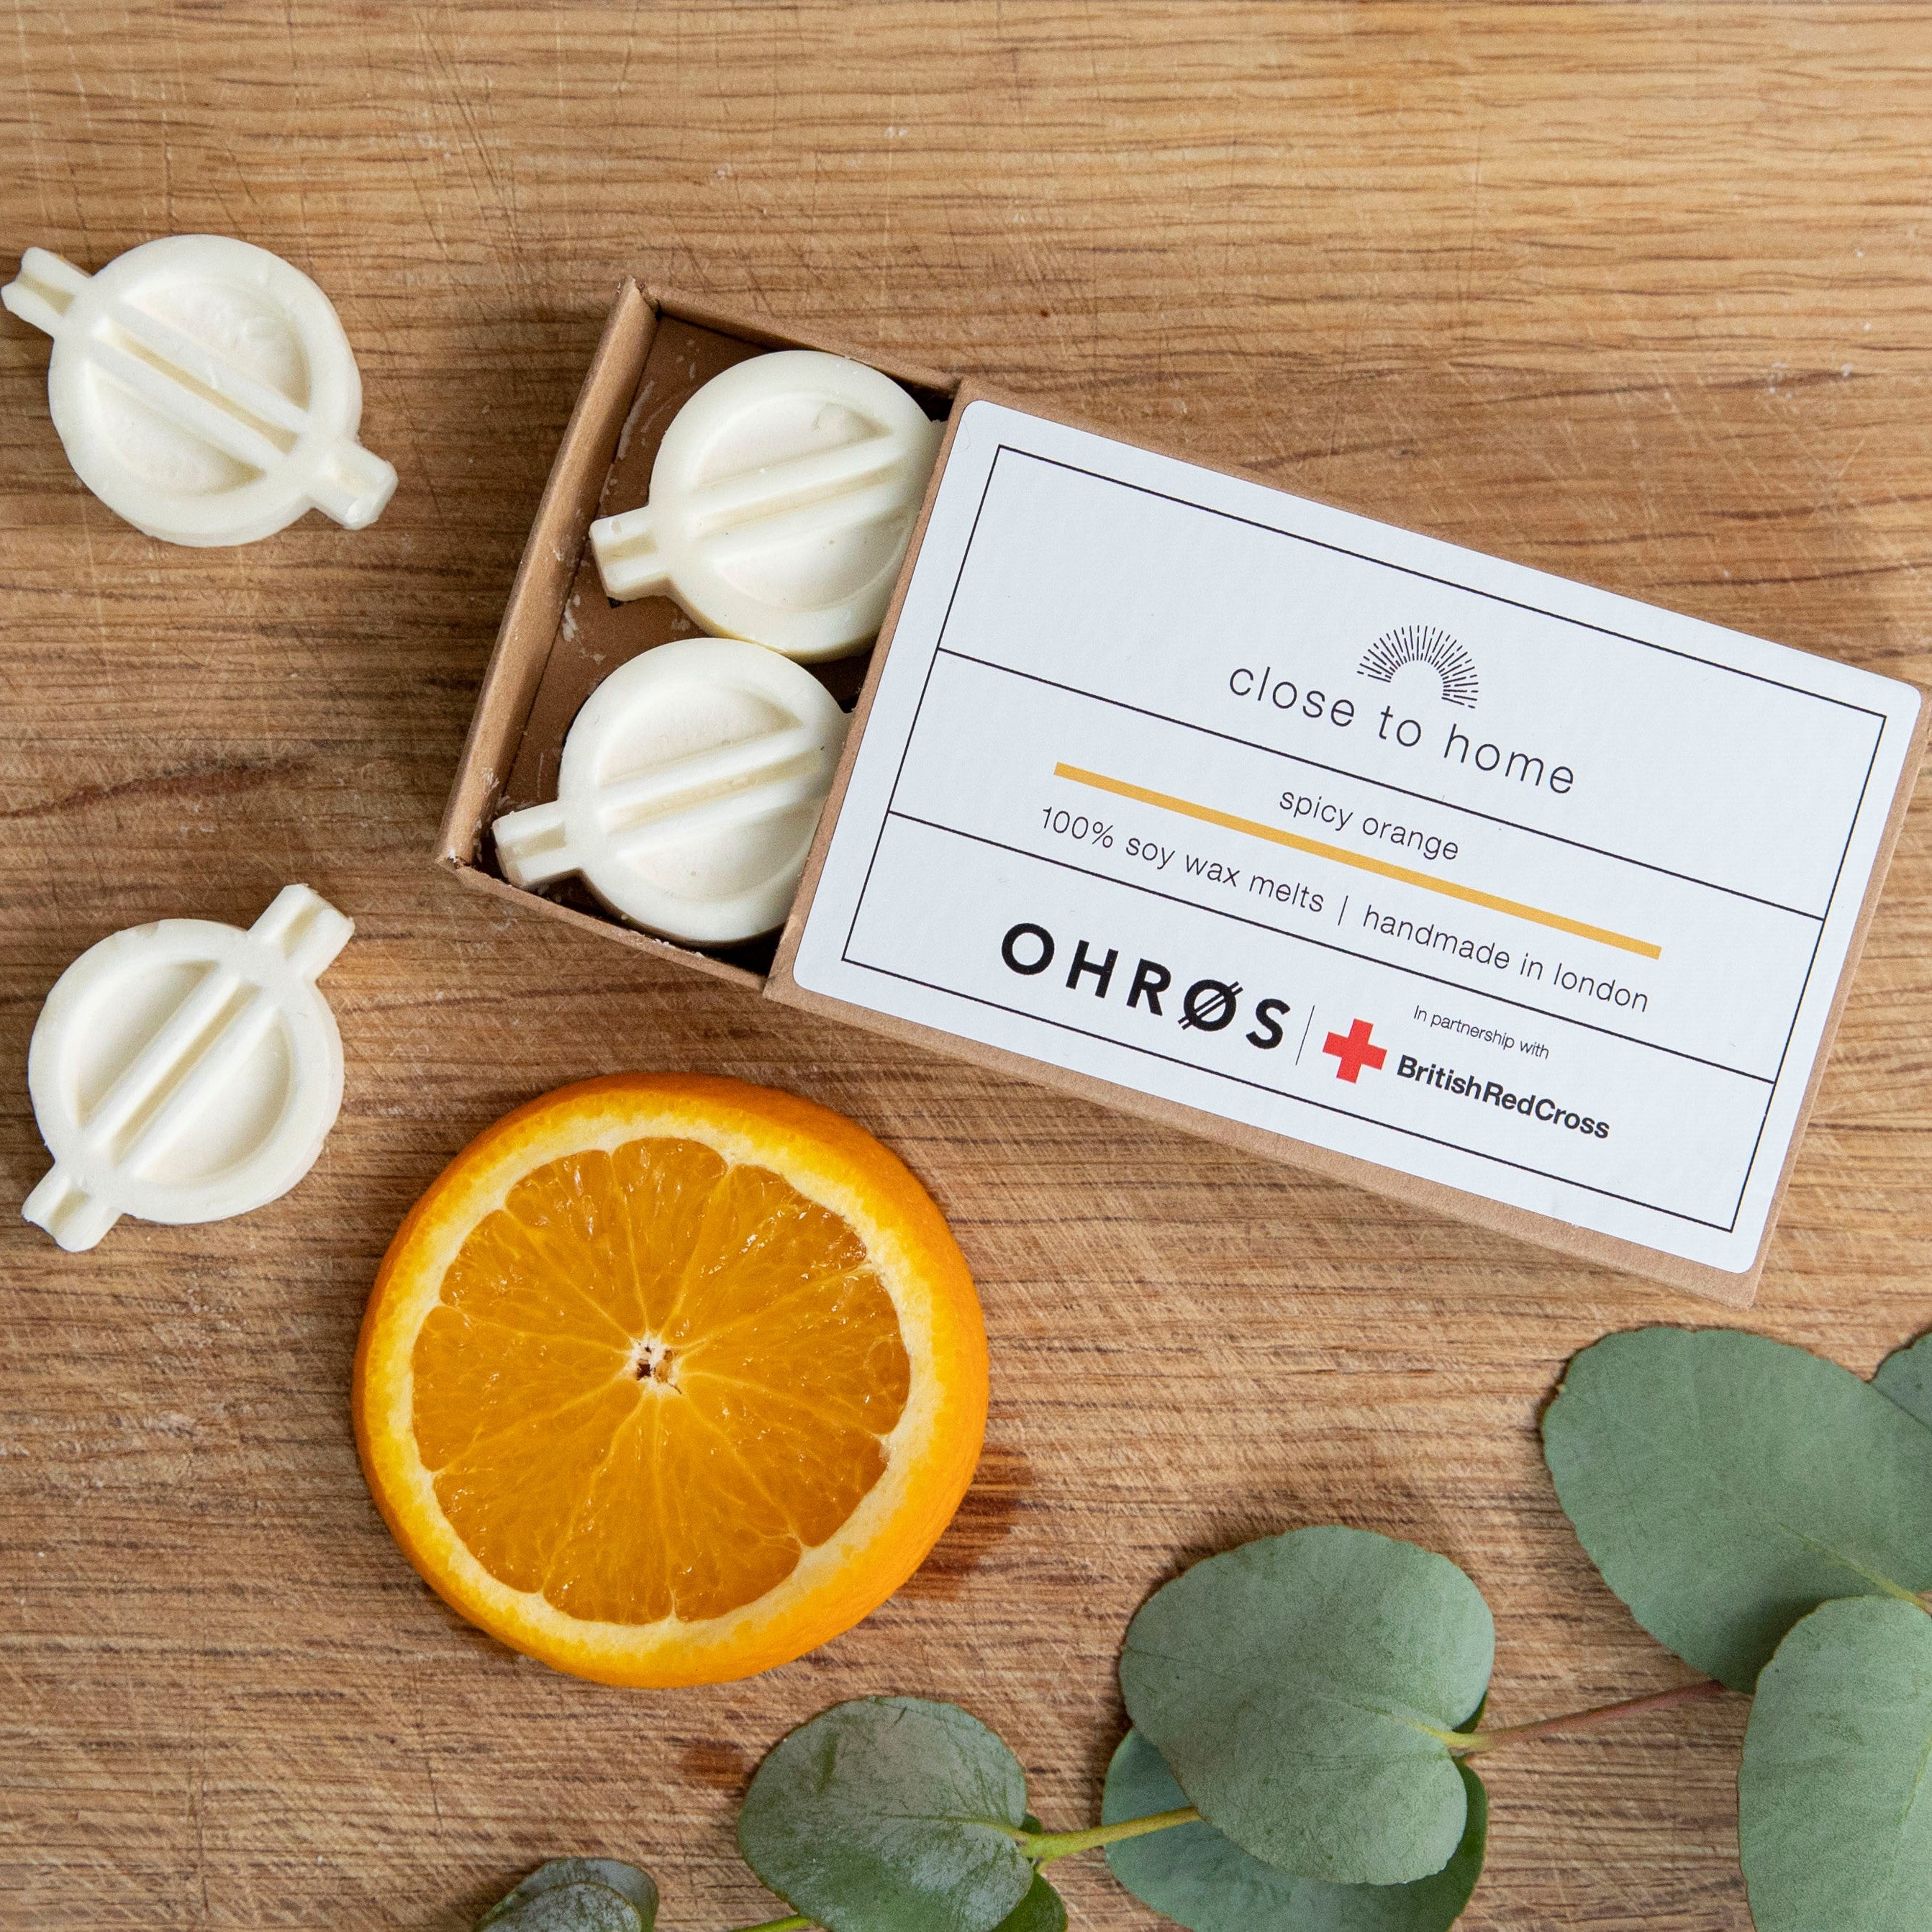 Designed by Refugees Spicy Orange Soy Wax Melts